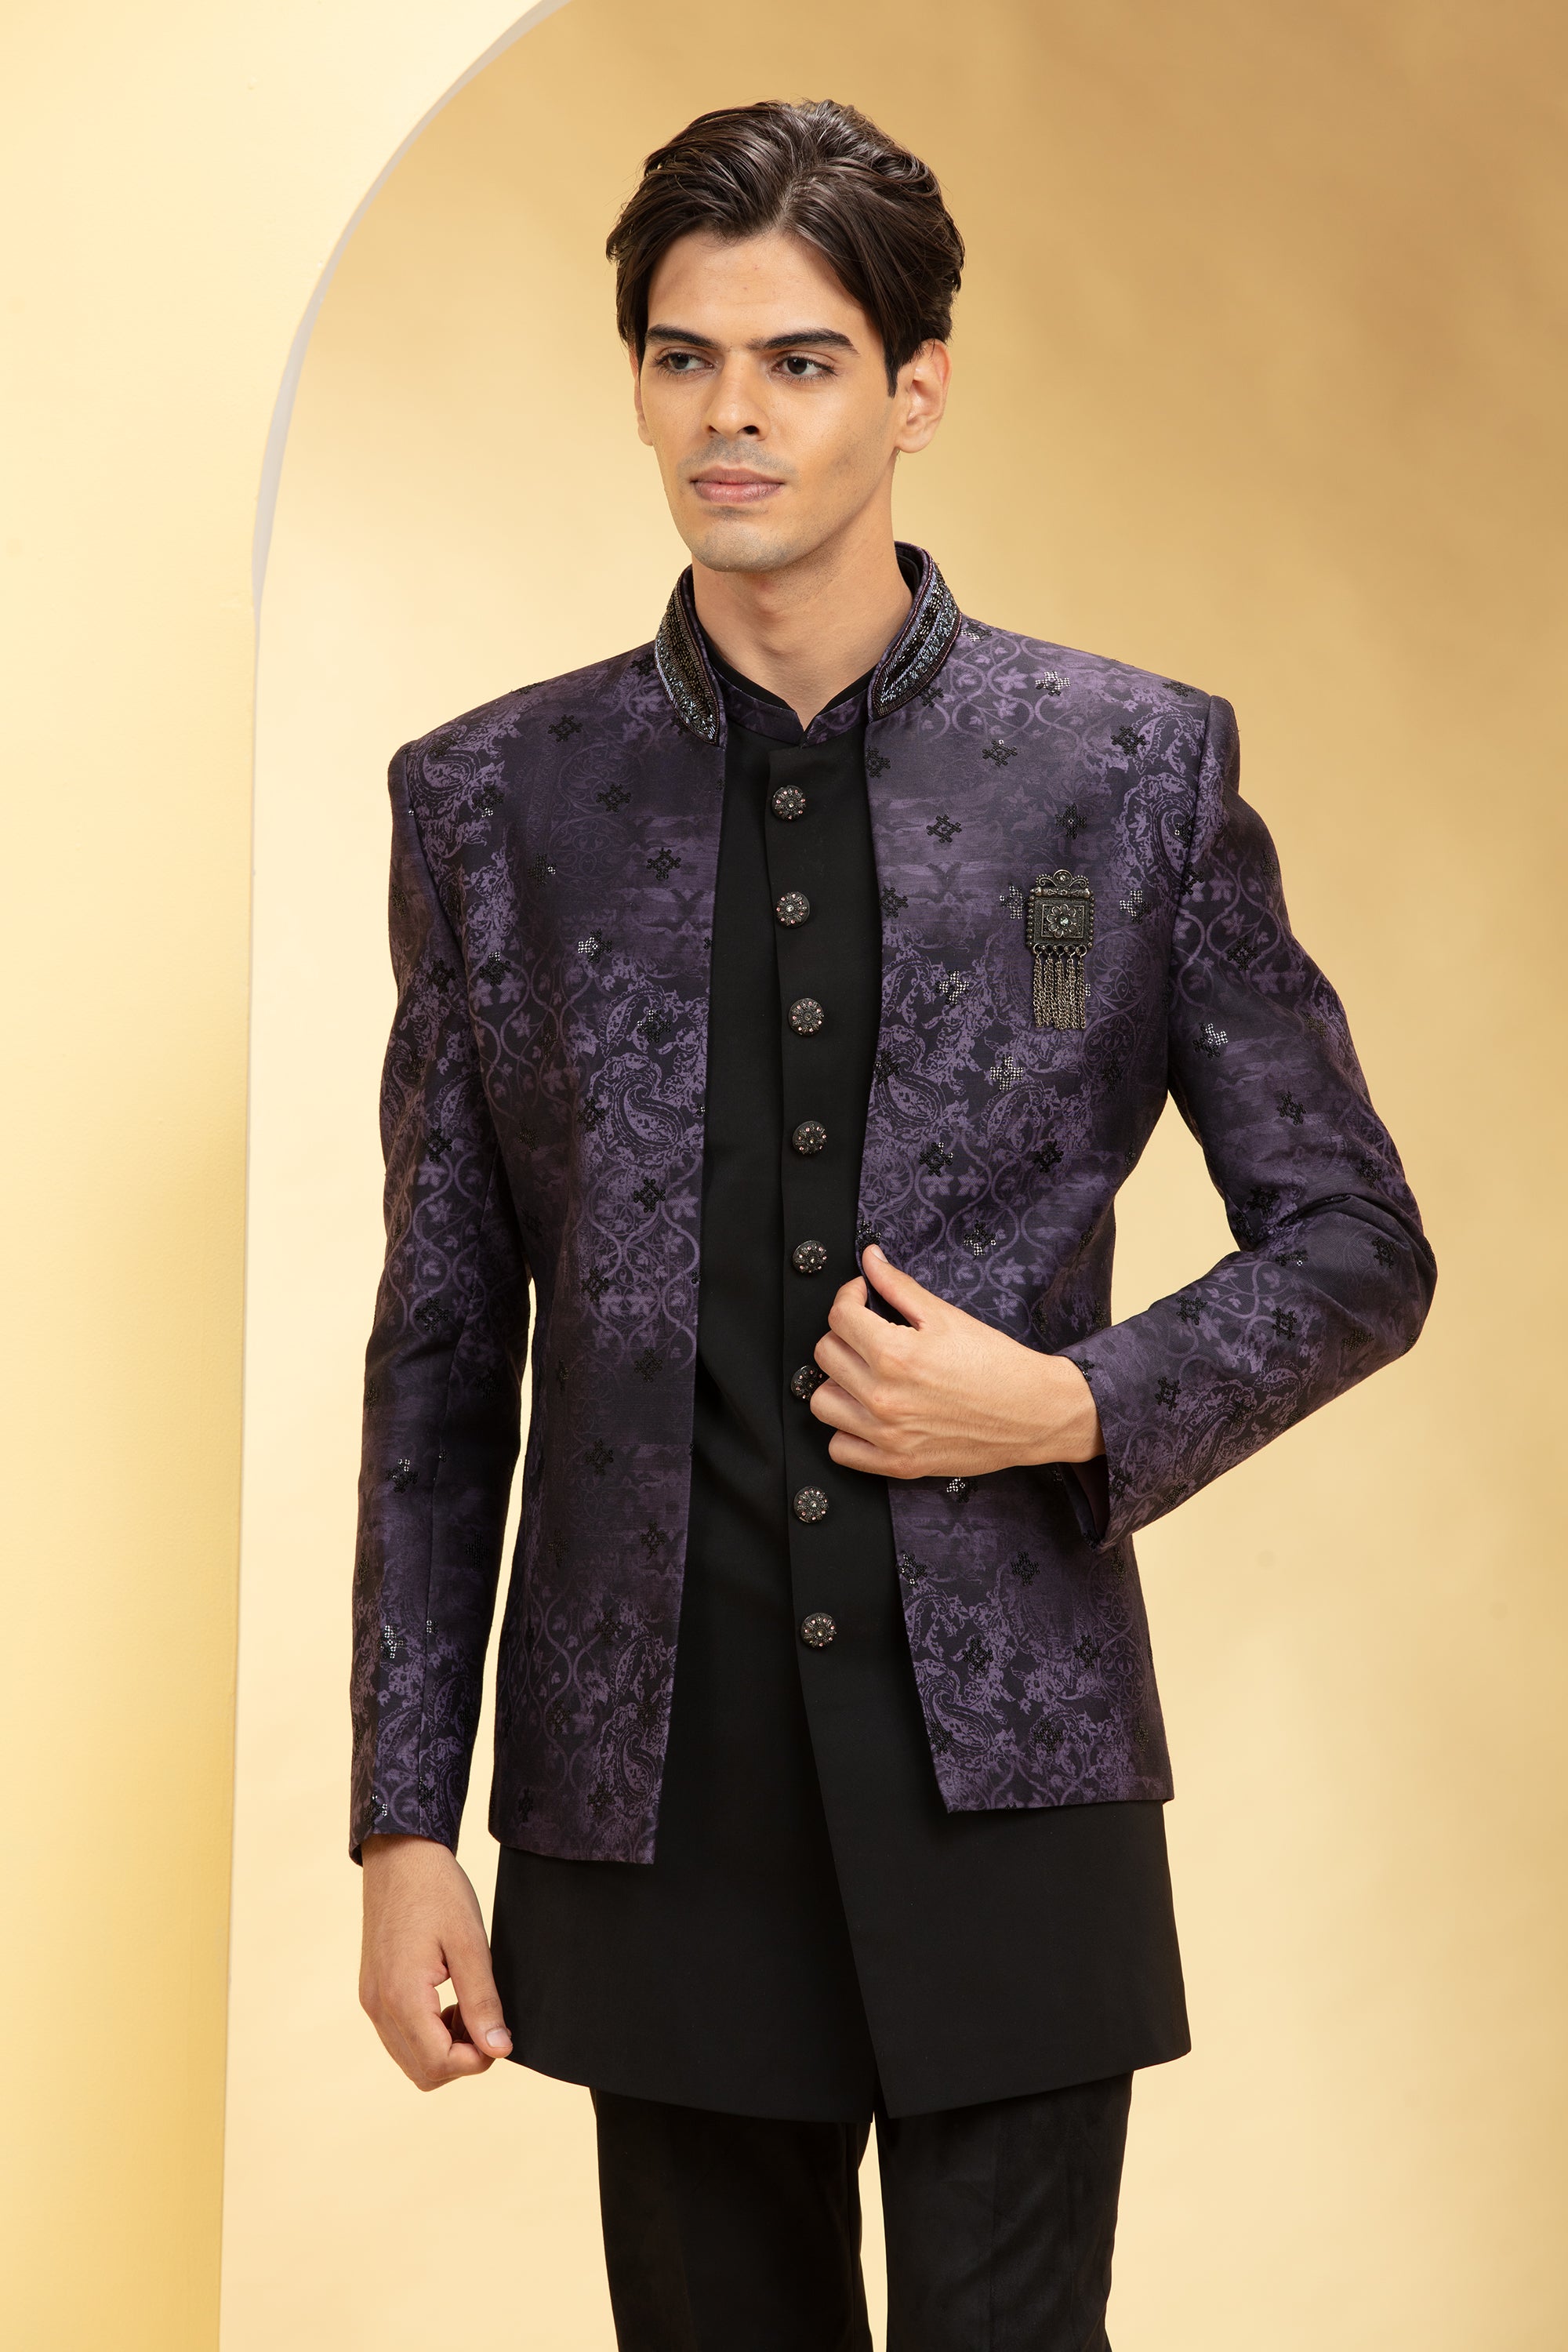 Eggplant purple Open Jodhpuri Set with metal buttons and silver brooch